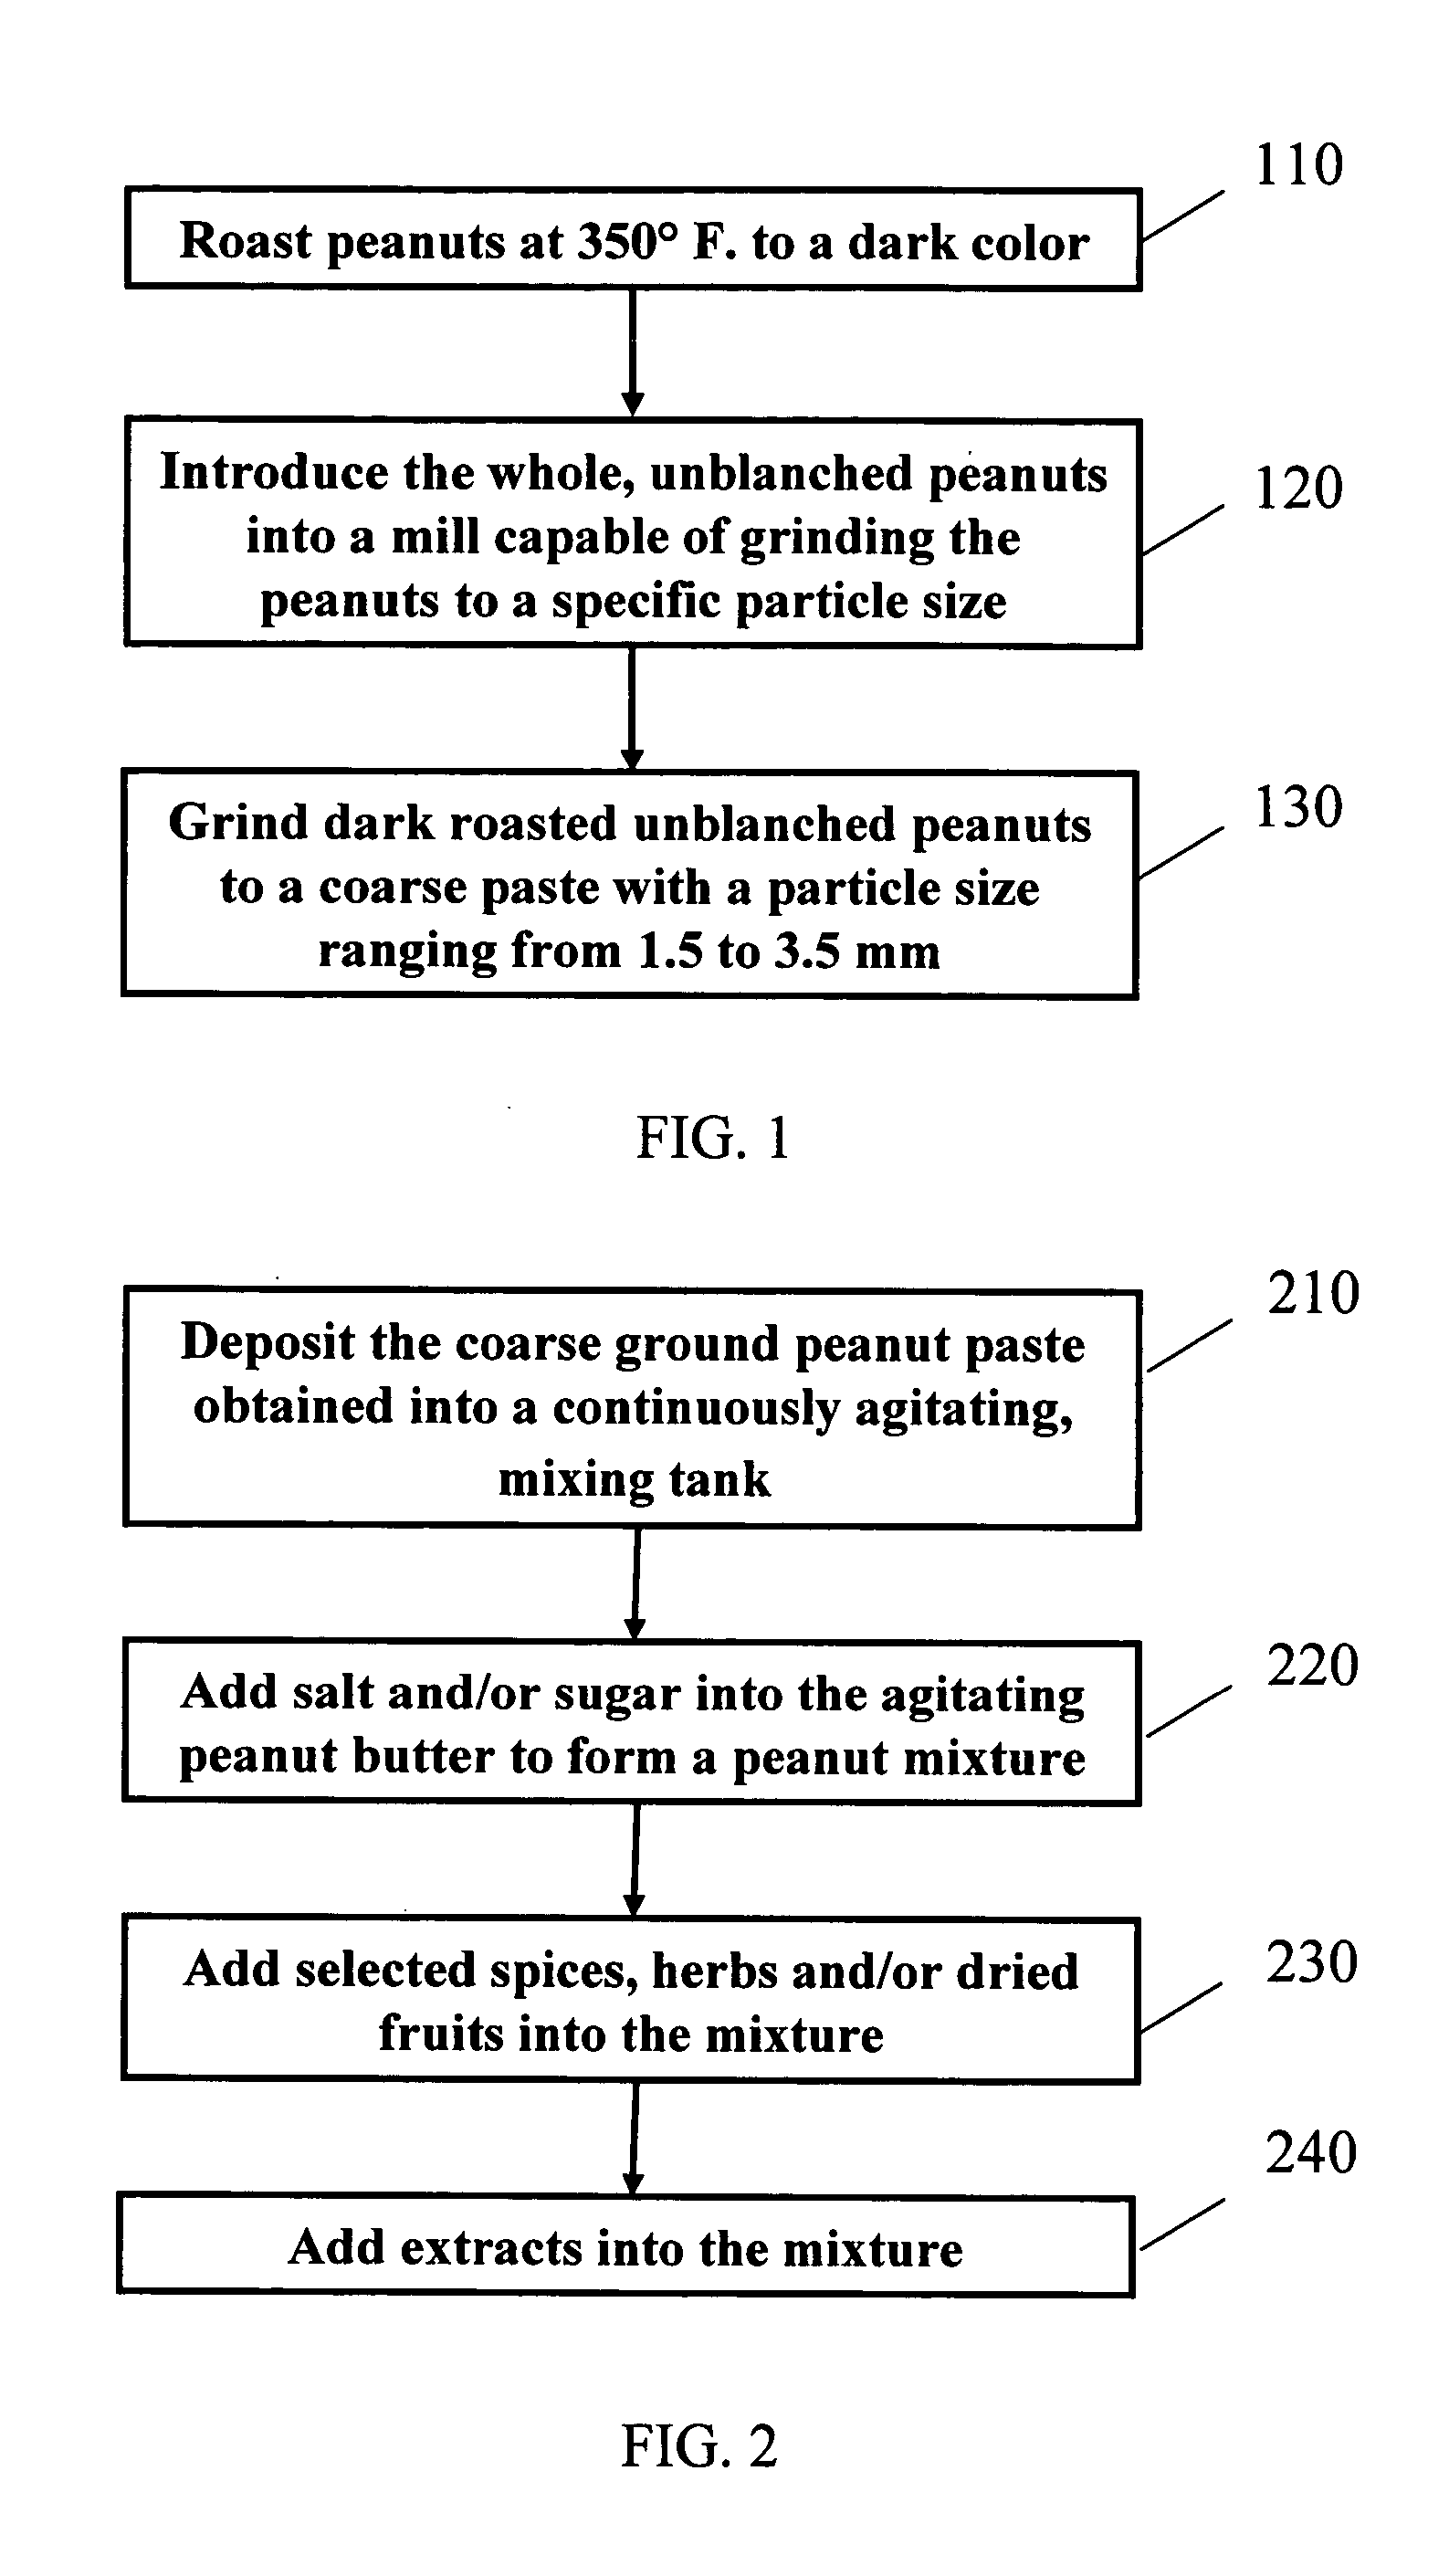 Process for making non-emulsified, spiced or flavored peanut butters and peanut butter spreads, with lower fat content, long shelf life, and minimal oil separation